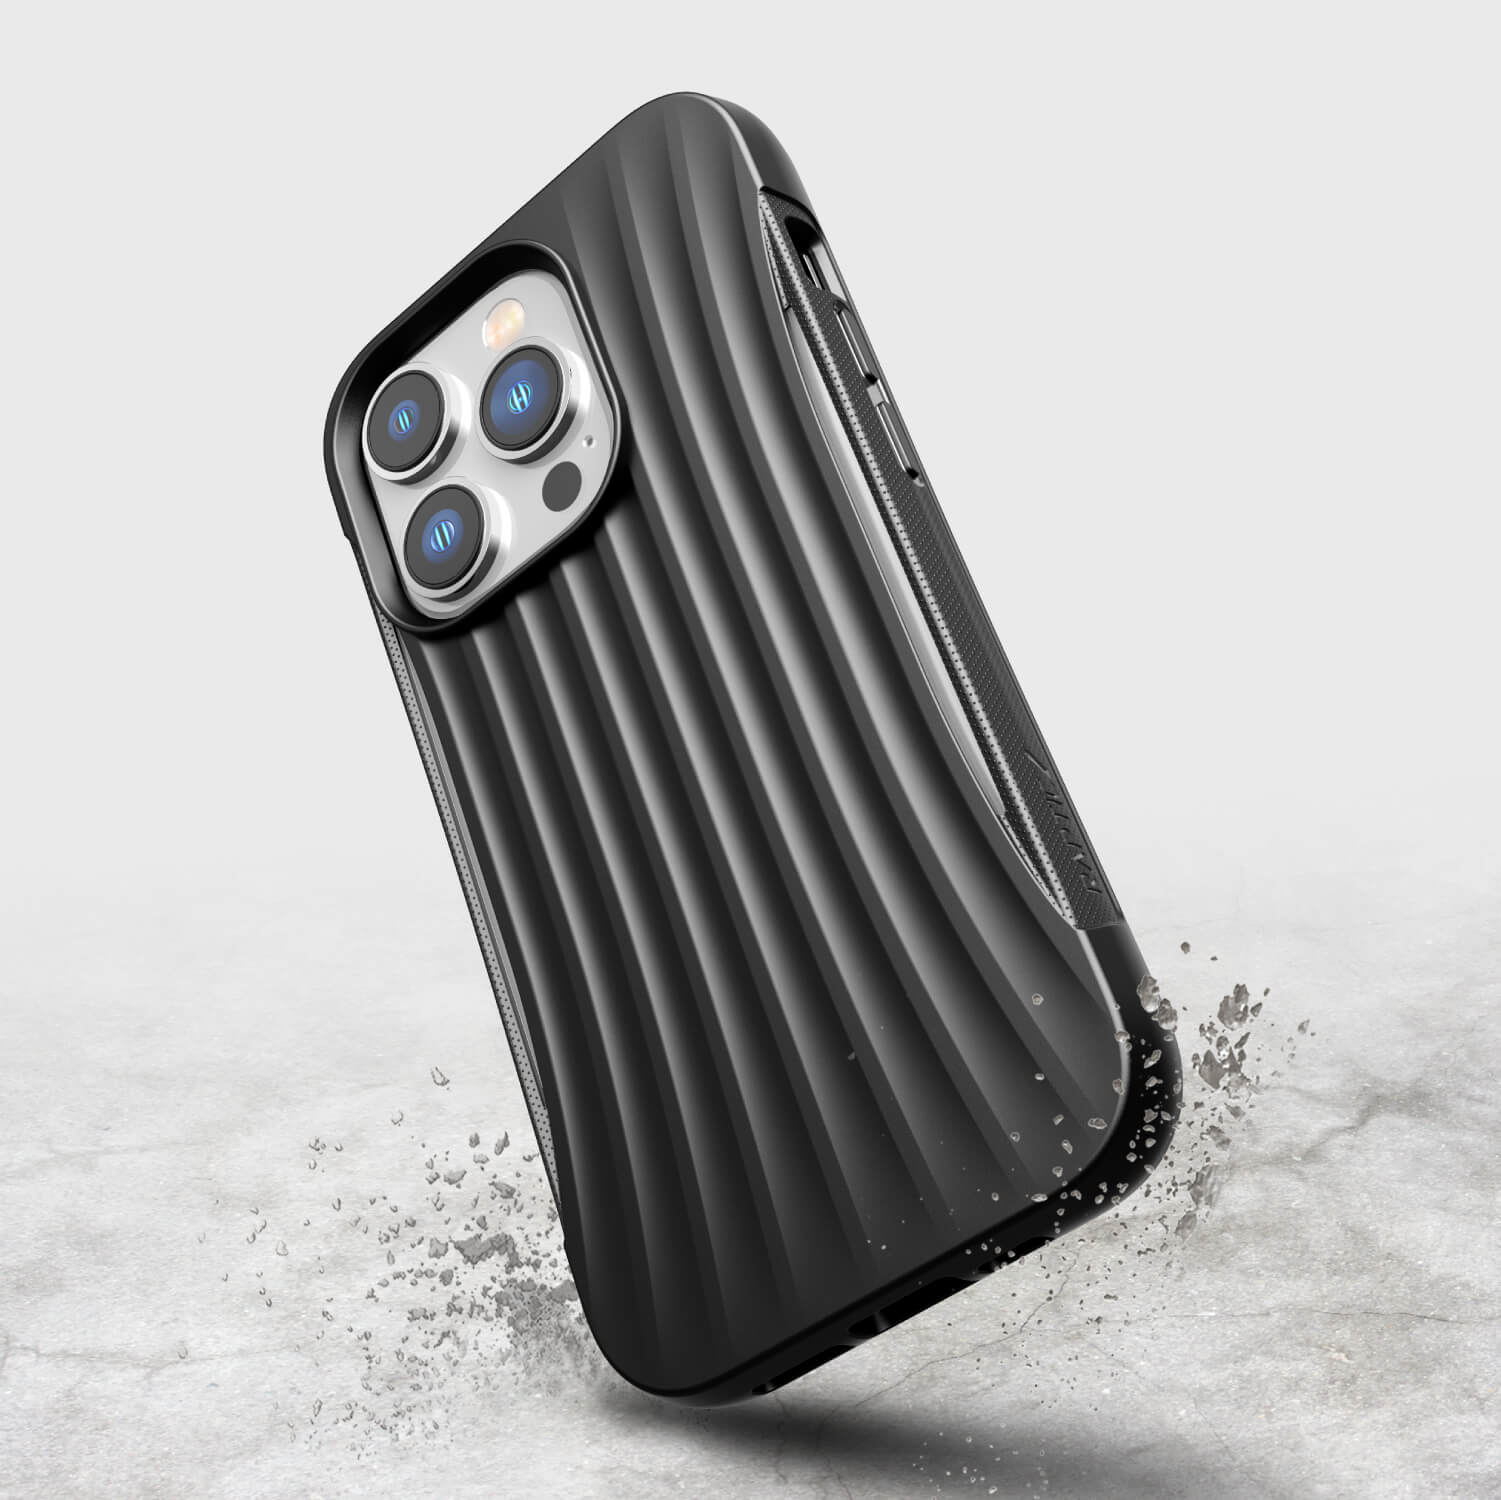 The iPhone 14 Pro Case - Clutch by Raptic is shown in black.